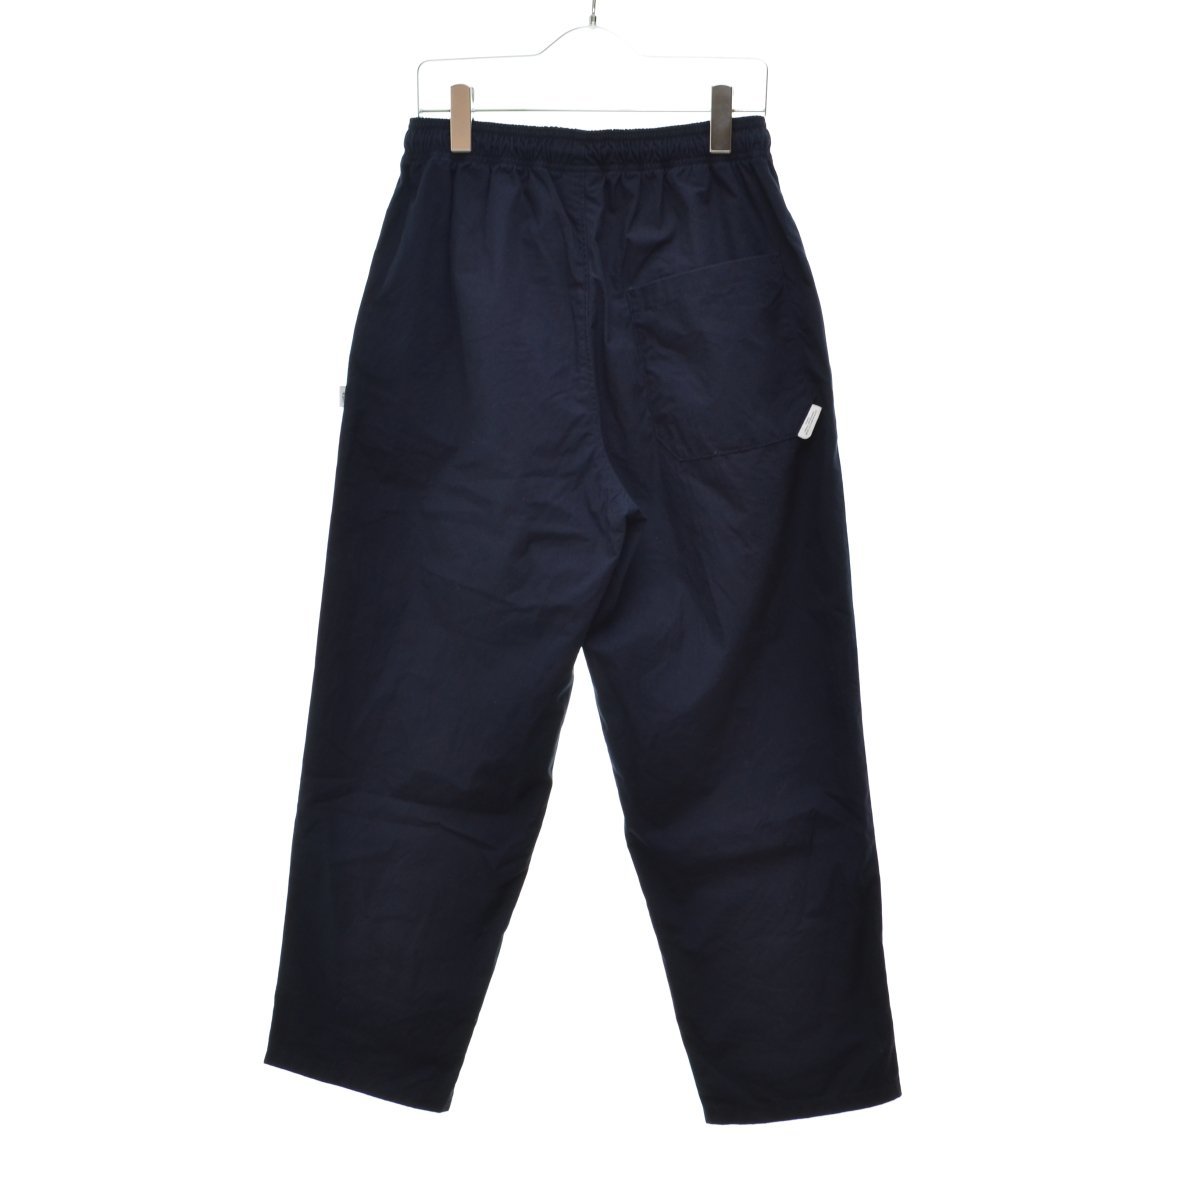 【1/S】WTAPS / ダブルタップス 23AW 232TQDT-PTM01 SDDT2001 / TROUSERS / COTTON. RIPSTOPパンツ_画像2